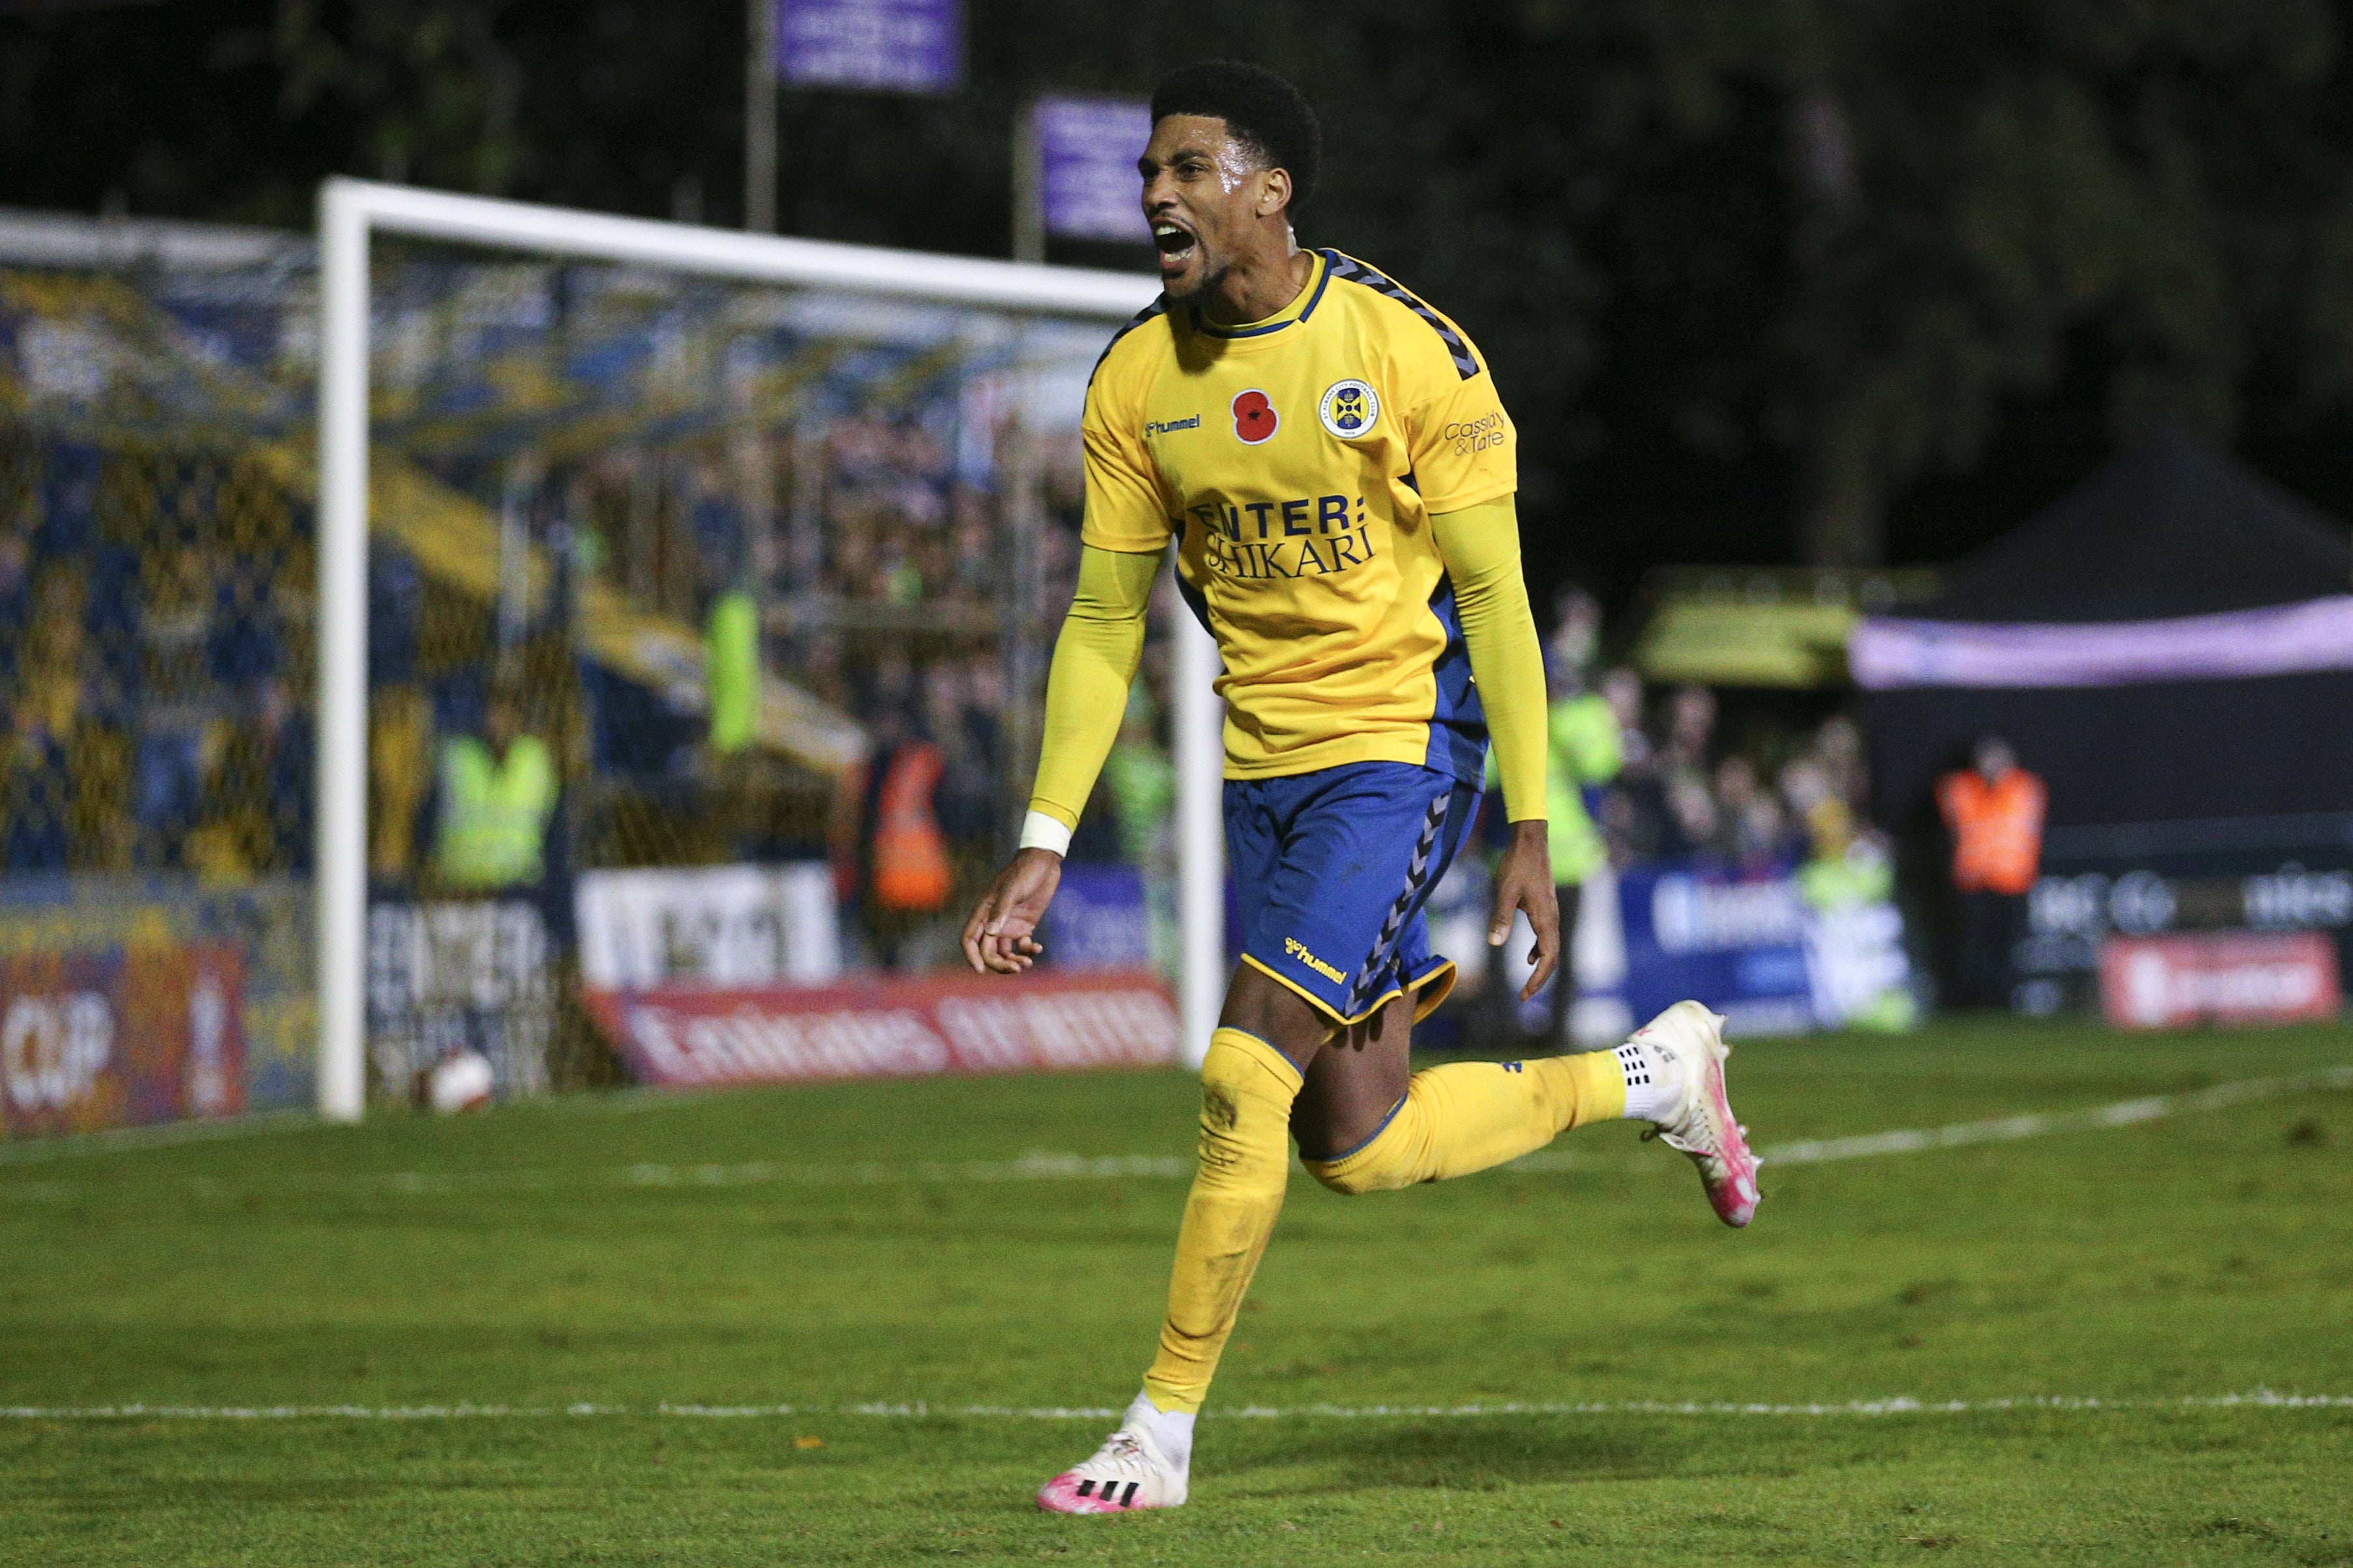 Shaun Jeffers sealed a famous FA Cup win for St Albans over Forest Green Rovers (Nigel French/PA)